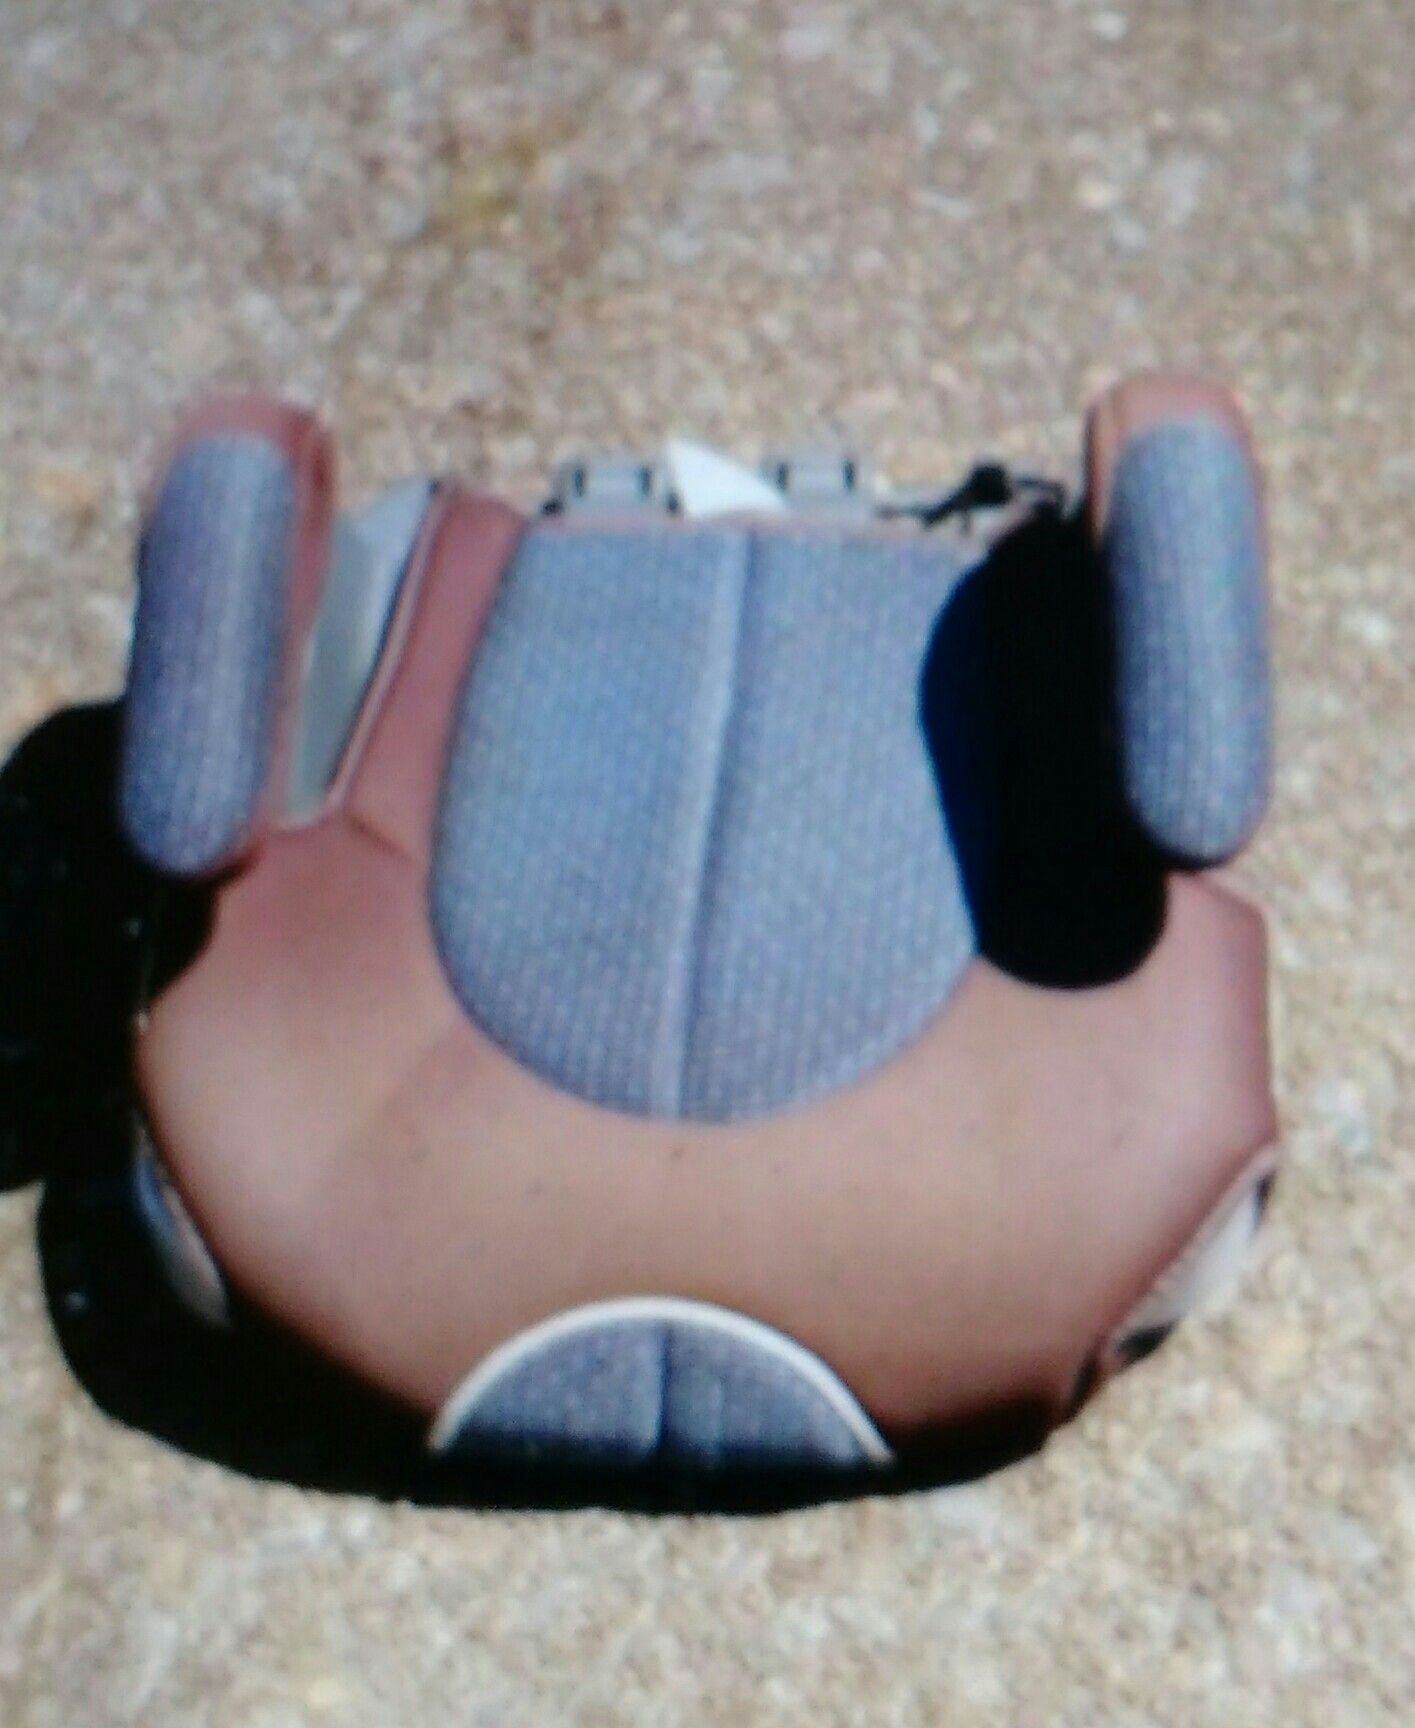 Child car booster seat